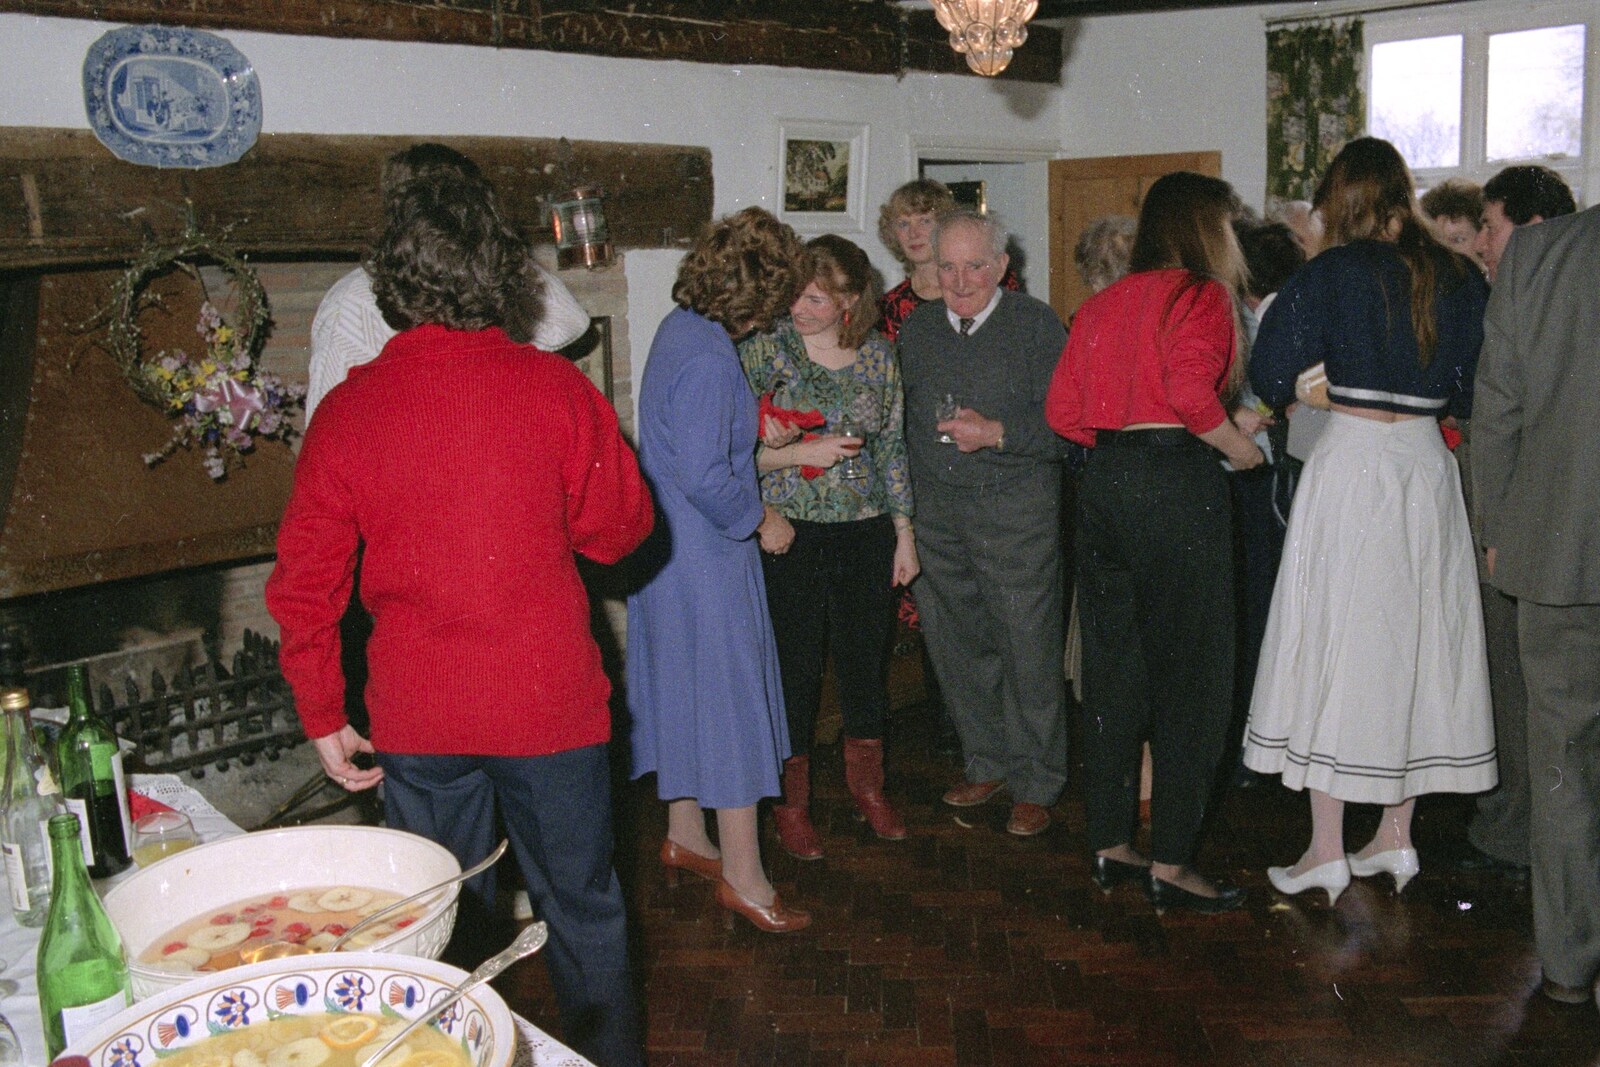 Crowds in the kitchen from Pancake Day in Starston, Norfolk - 27th February 1990